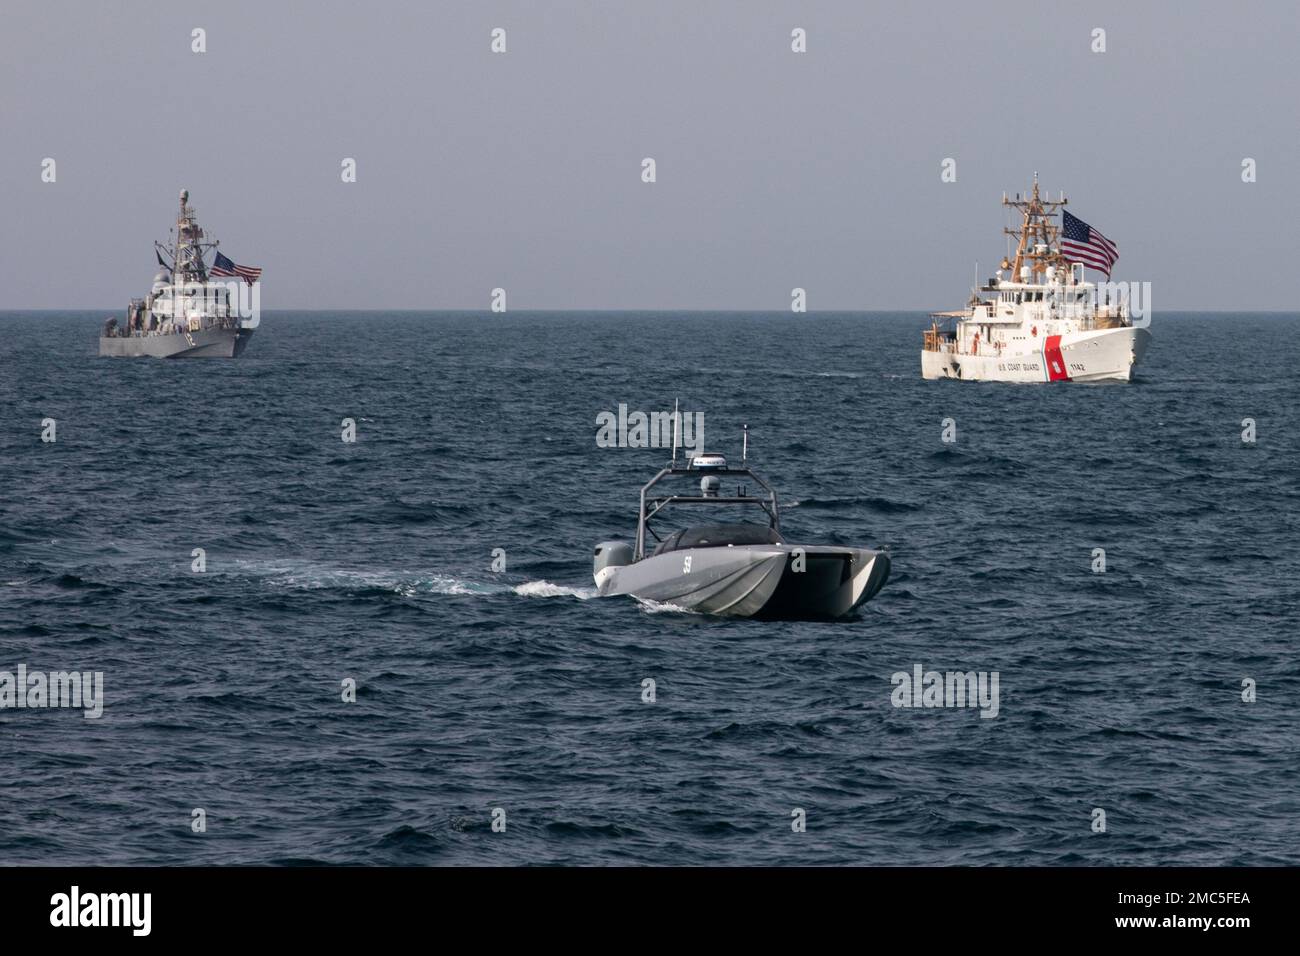 220626-A-JJ498-1224 ARABIAN GULF (June 26, 2022) A Devil Ray T-38 unmanned surface vessel, U.S. Coast Guard cutter USCGC Robert Goldman (WPC 1142), and coastal patrol ship USS Thunderbolt (PC 12) sail in the Arabian Gulf, June 26. U.S. naval forces regularly operate across the Middle East region to help ensure security and stability. Stock Photo